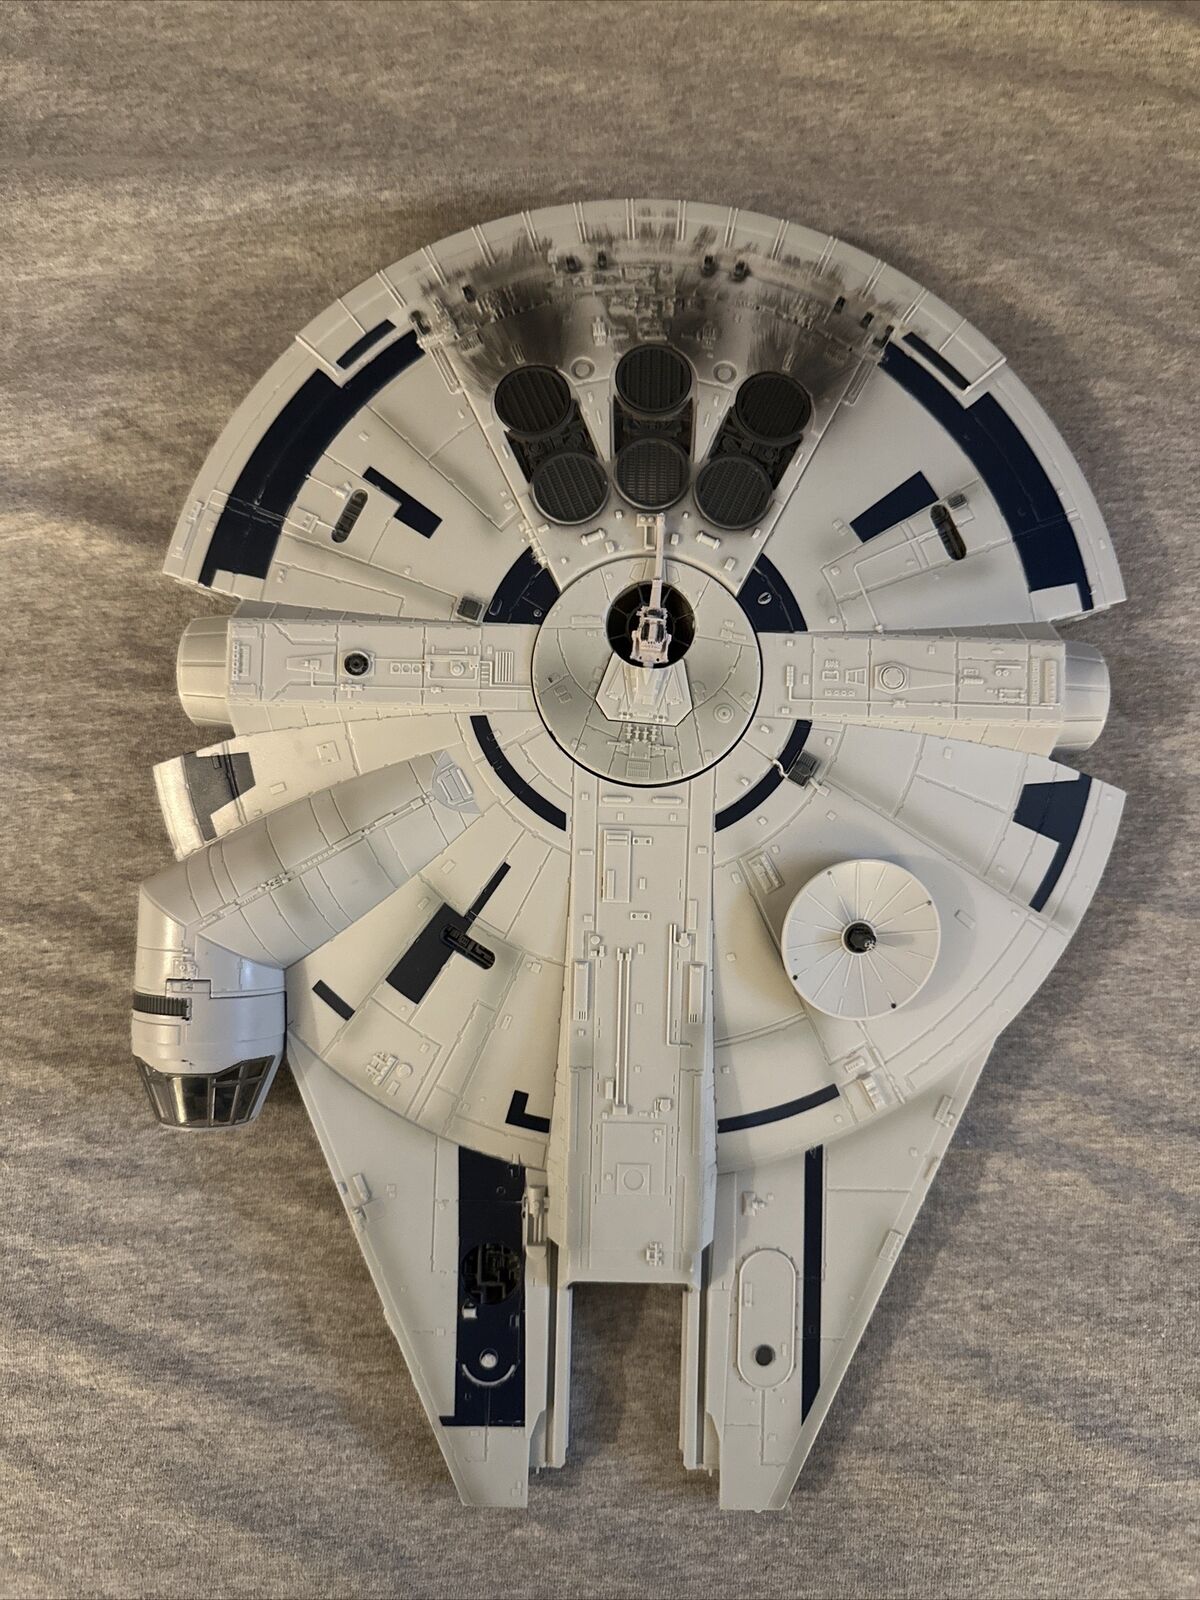 Disney Store Exclusive Star Wars Millennium Falcon with lights and sounds effect